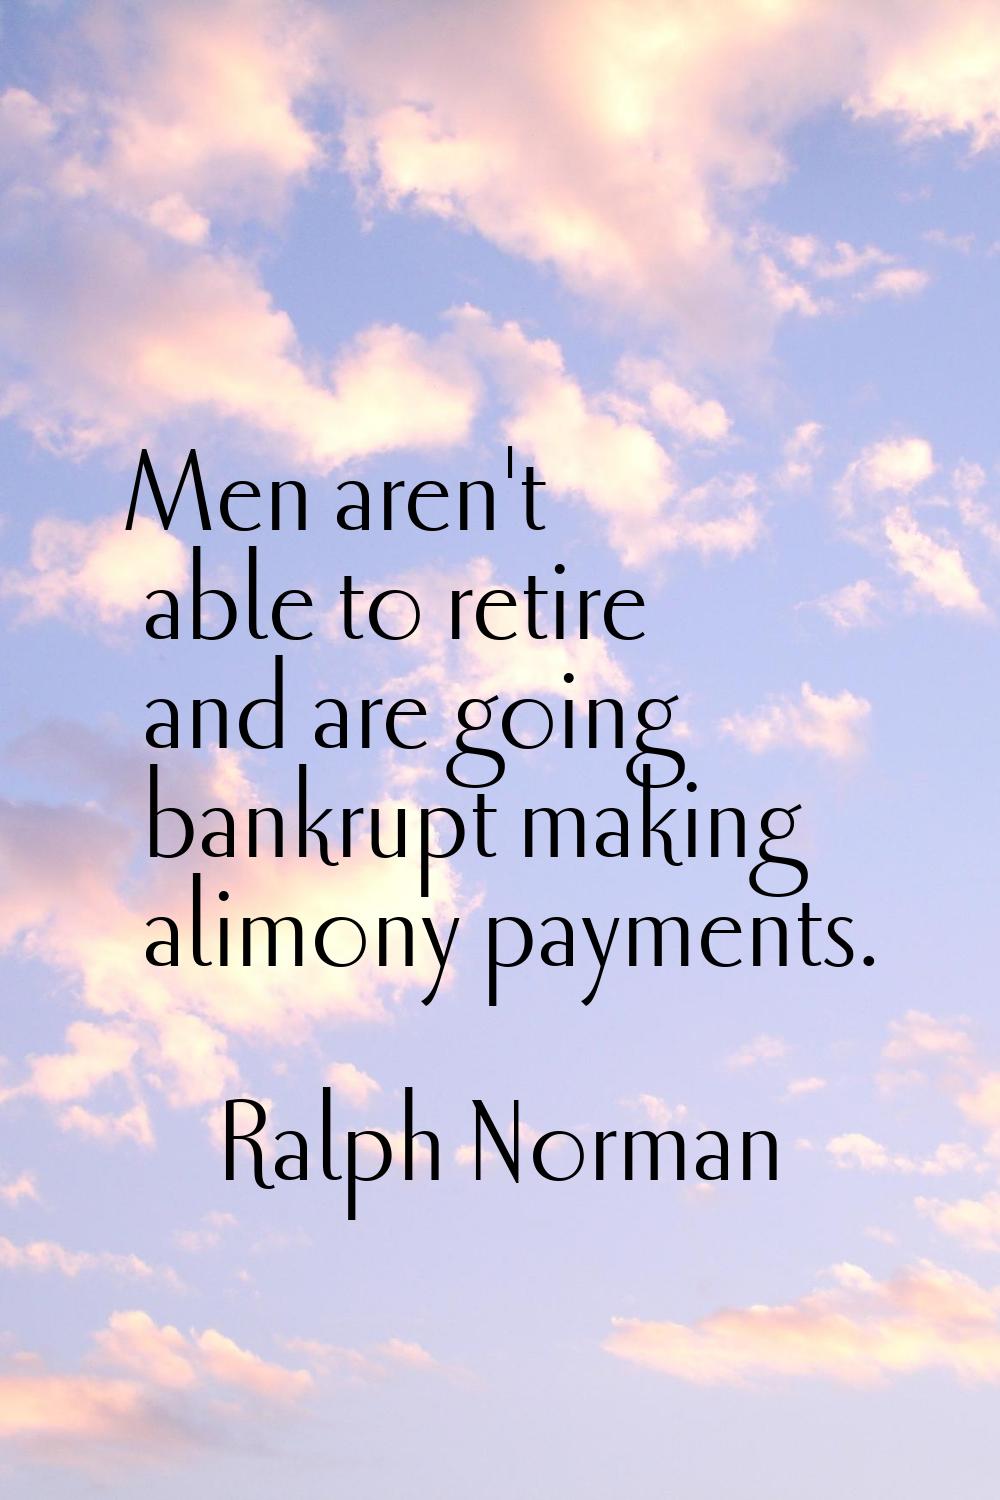 Men aren't able to retire and are going bankrupt making alimony payments.